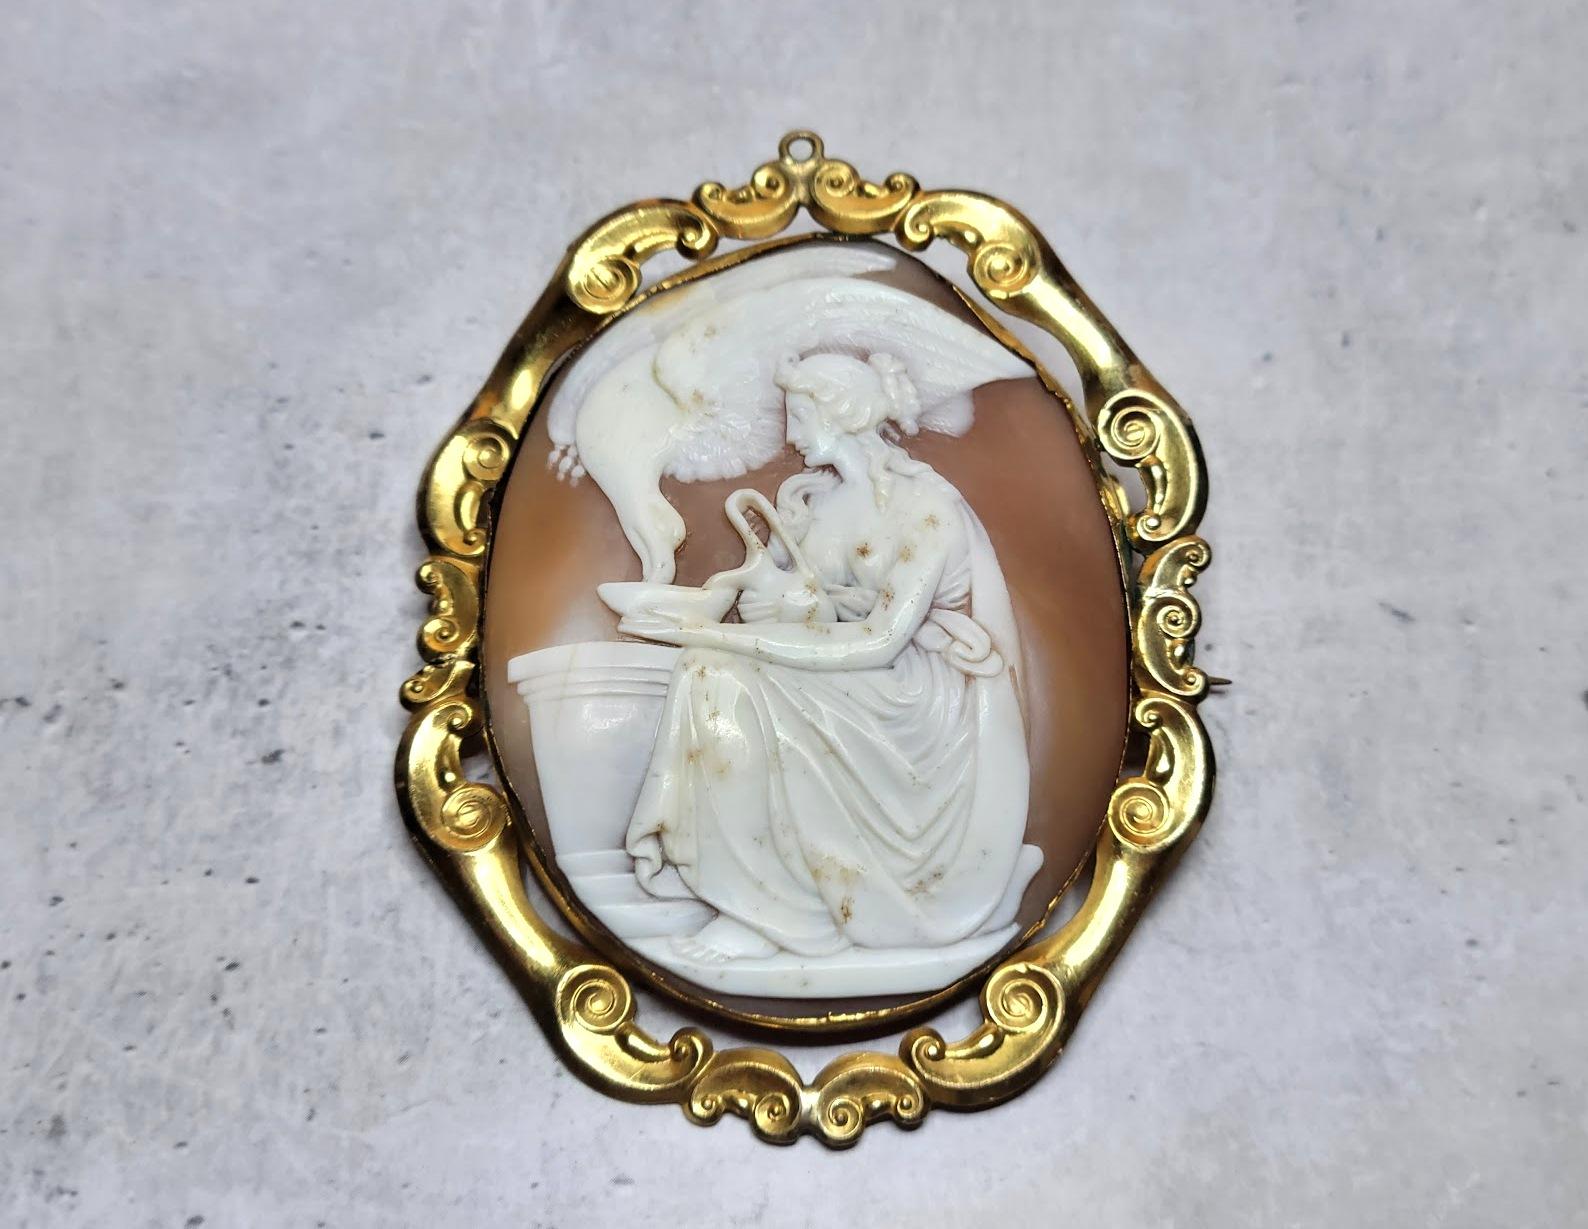 Huge cameo depicting Hebe, the Goddess of Youth and cupbearer to the Gods. In this cameo, Hebe is depicted while feeding the eagle of Zeus. This subject was very popular in the Victorian era, probably after a painting of Sir Willian Beechey (England